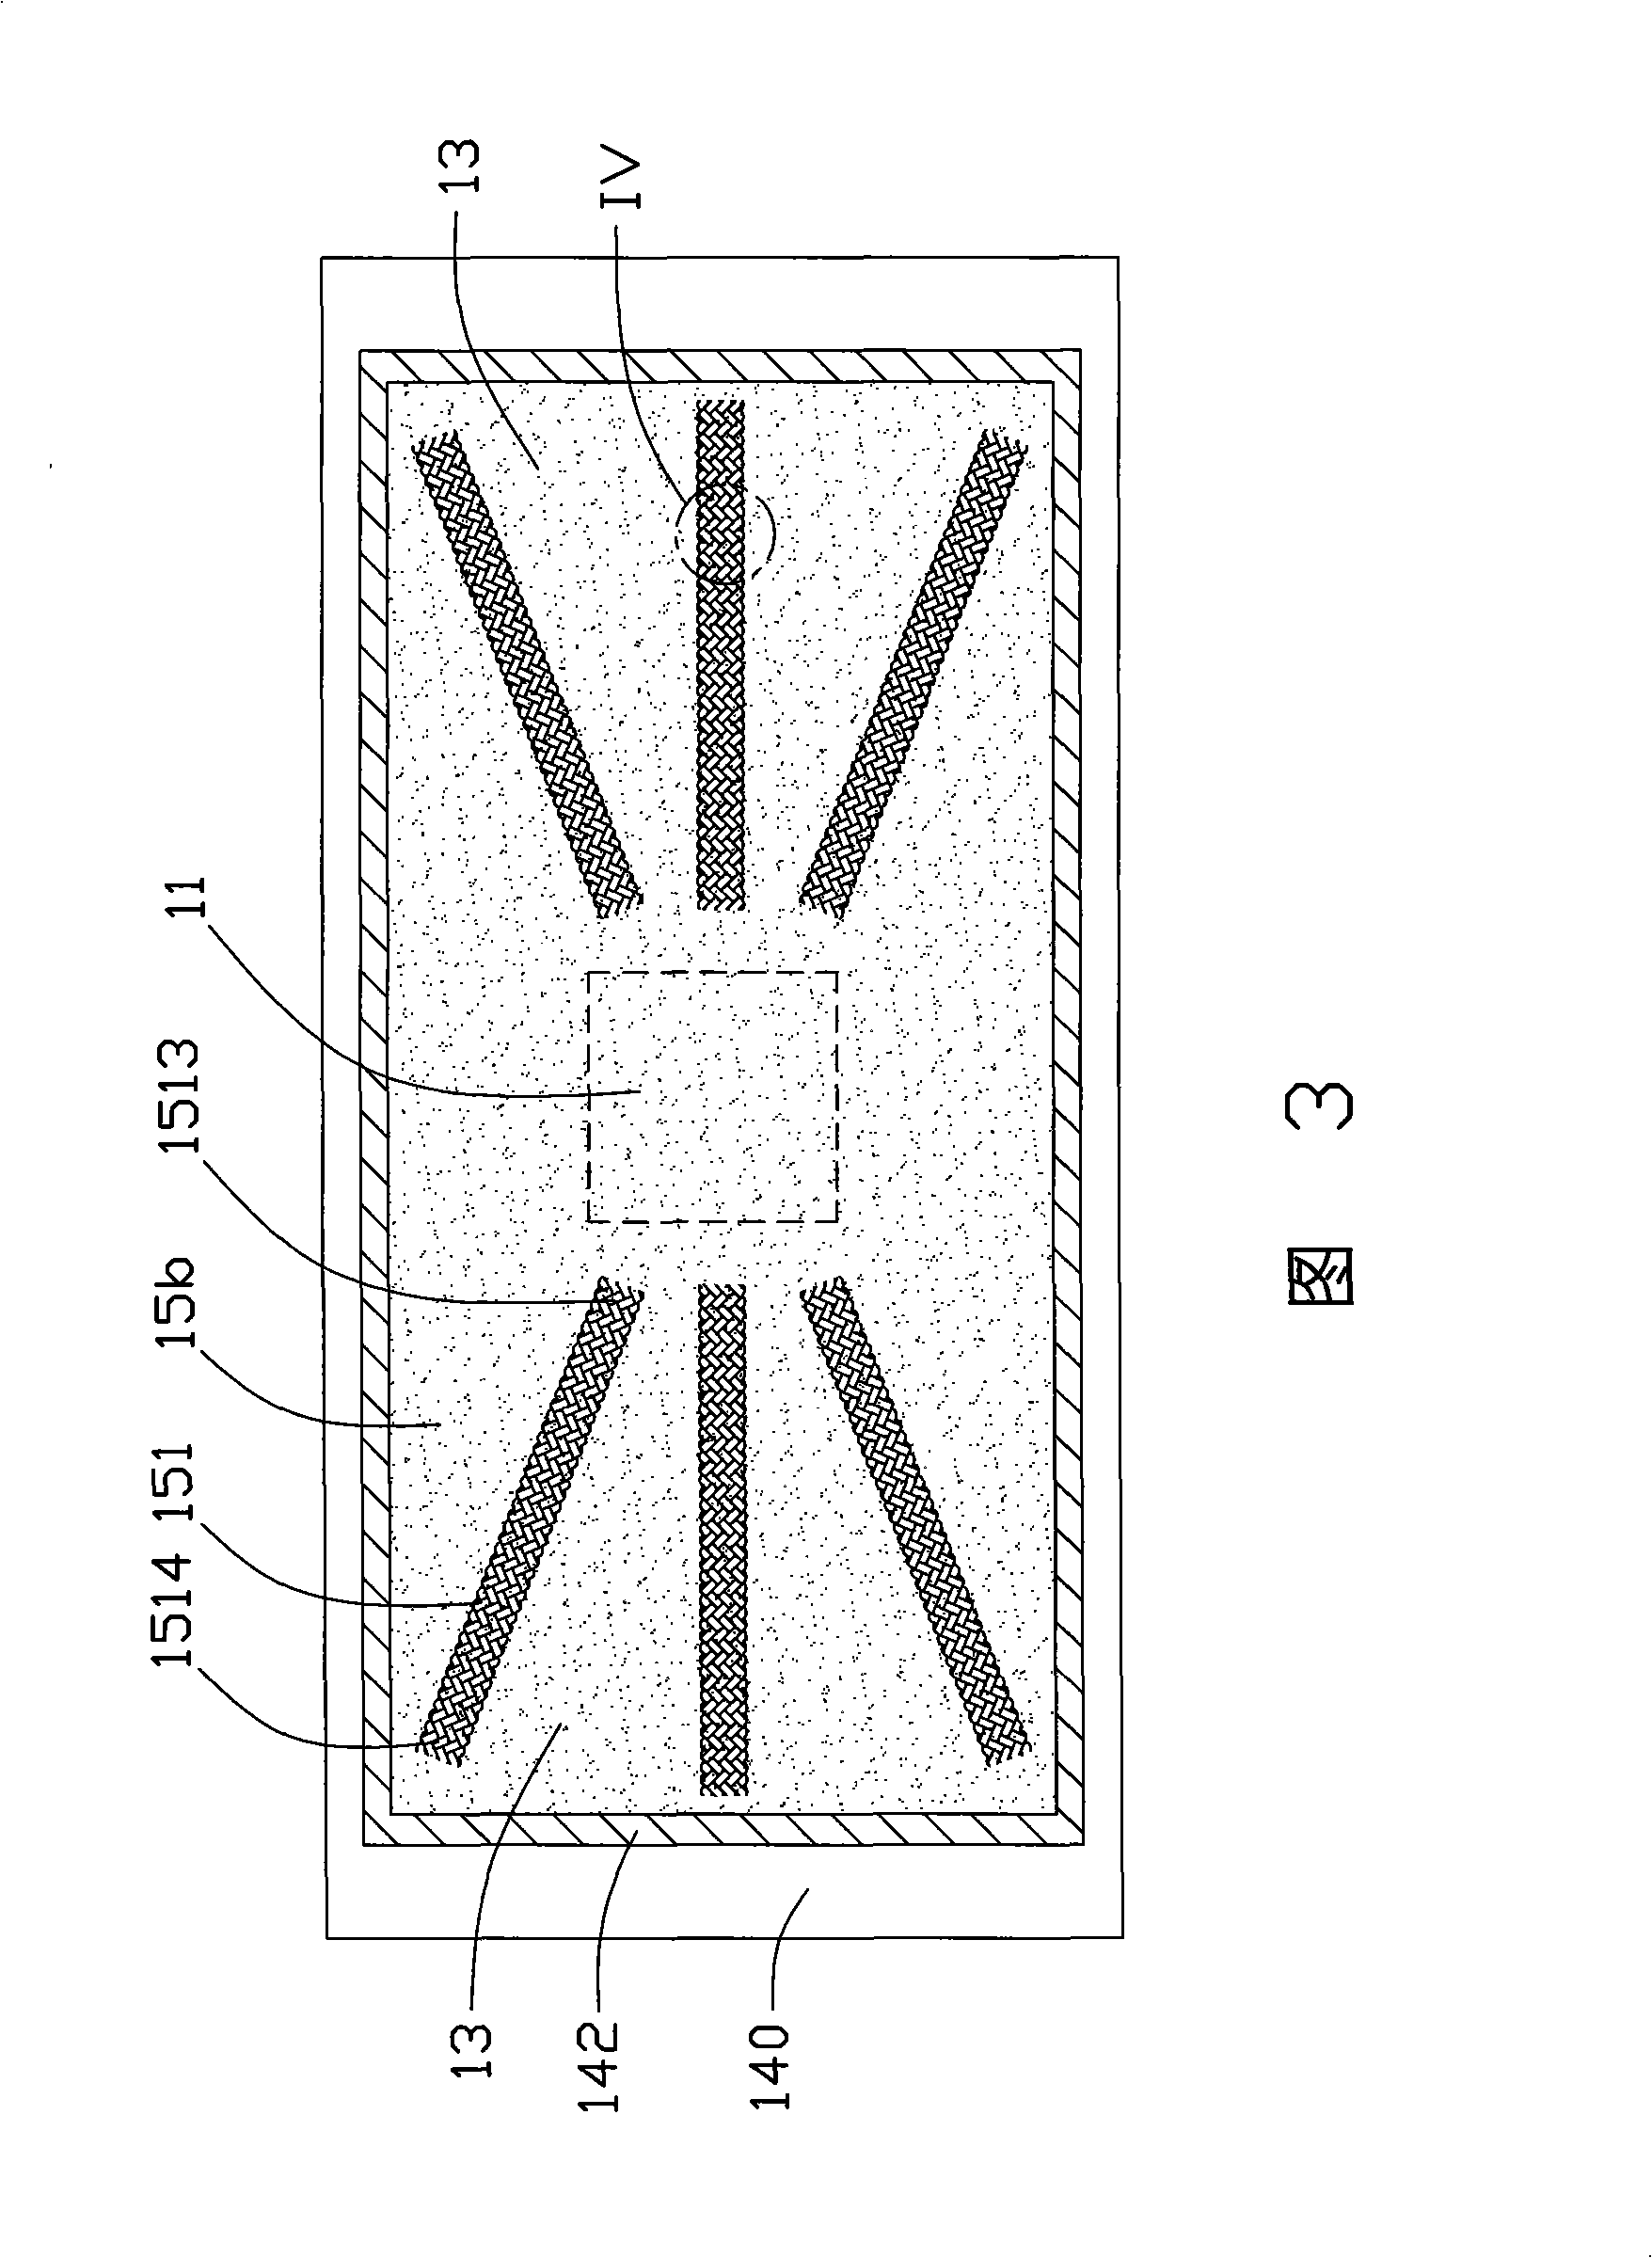 Even heating board and heat radiating device